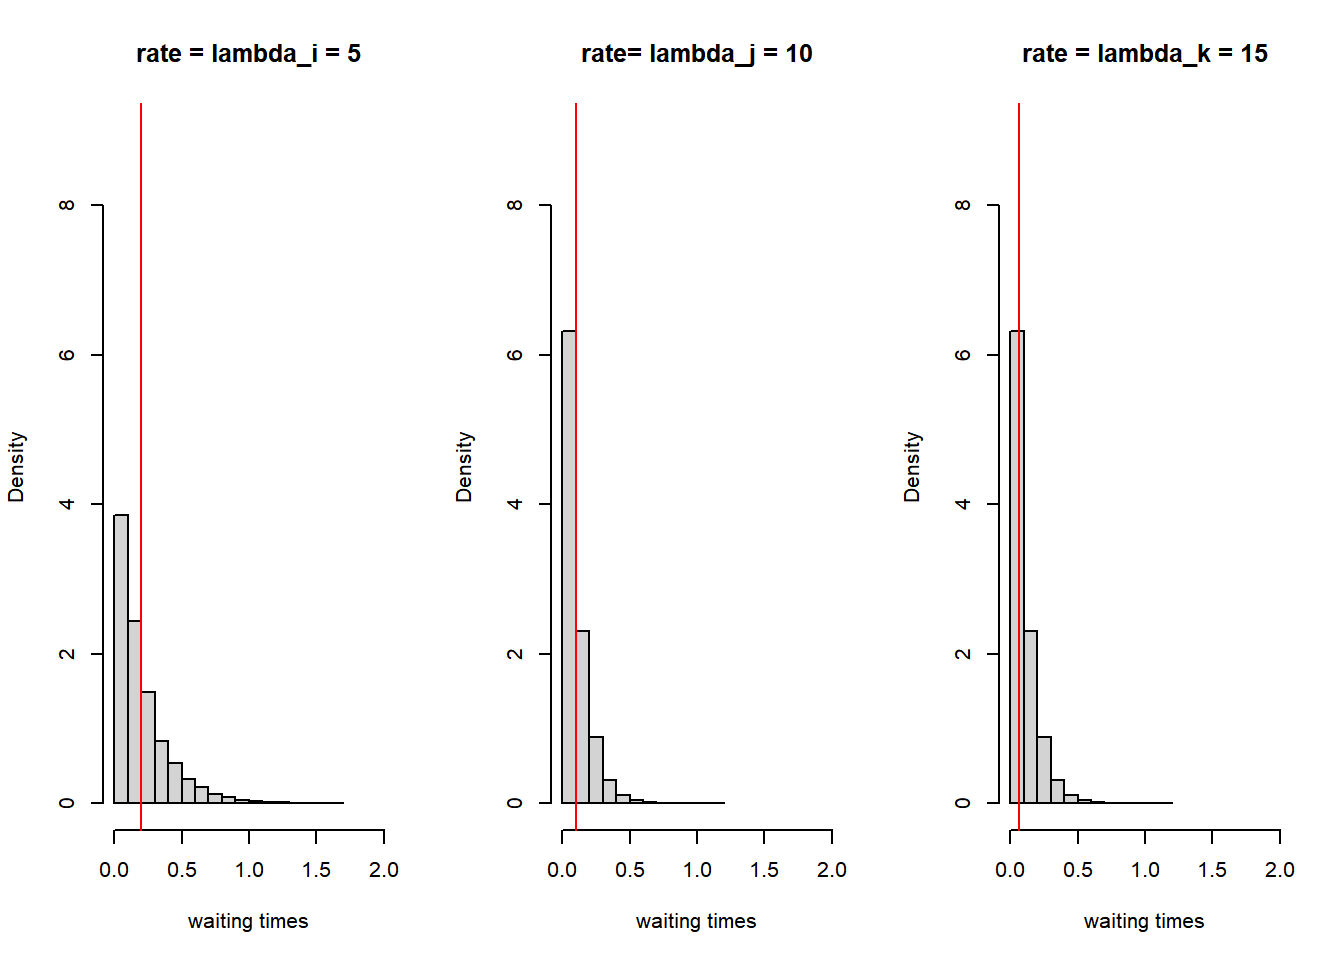 Rate parameters and waiting times